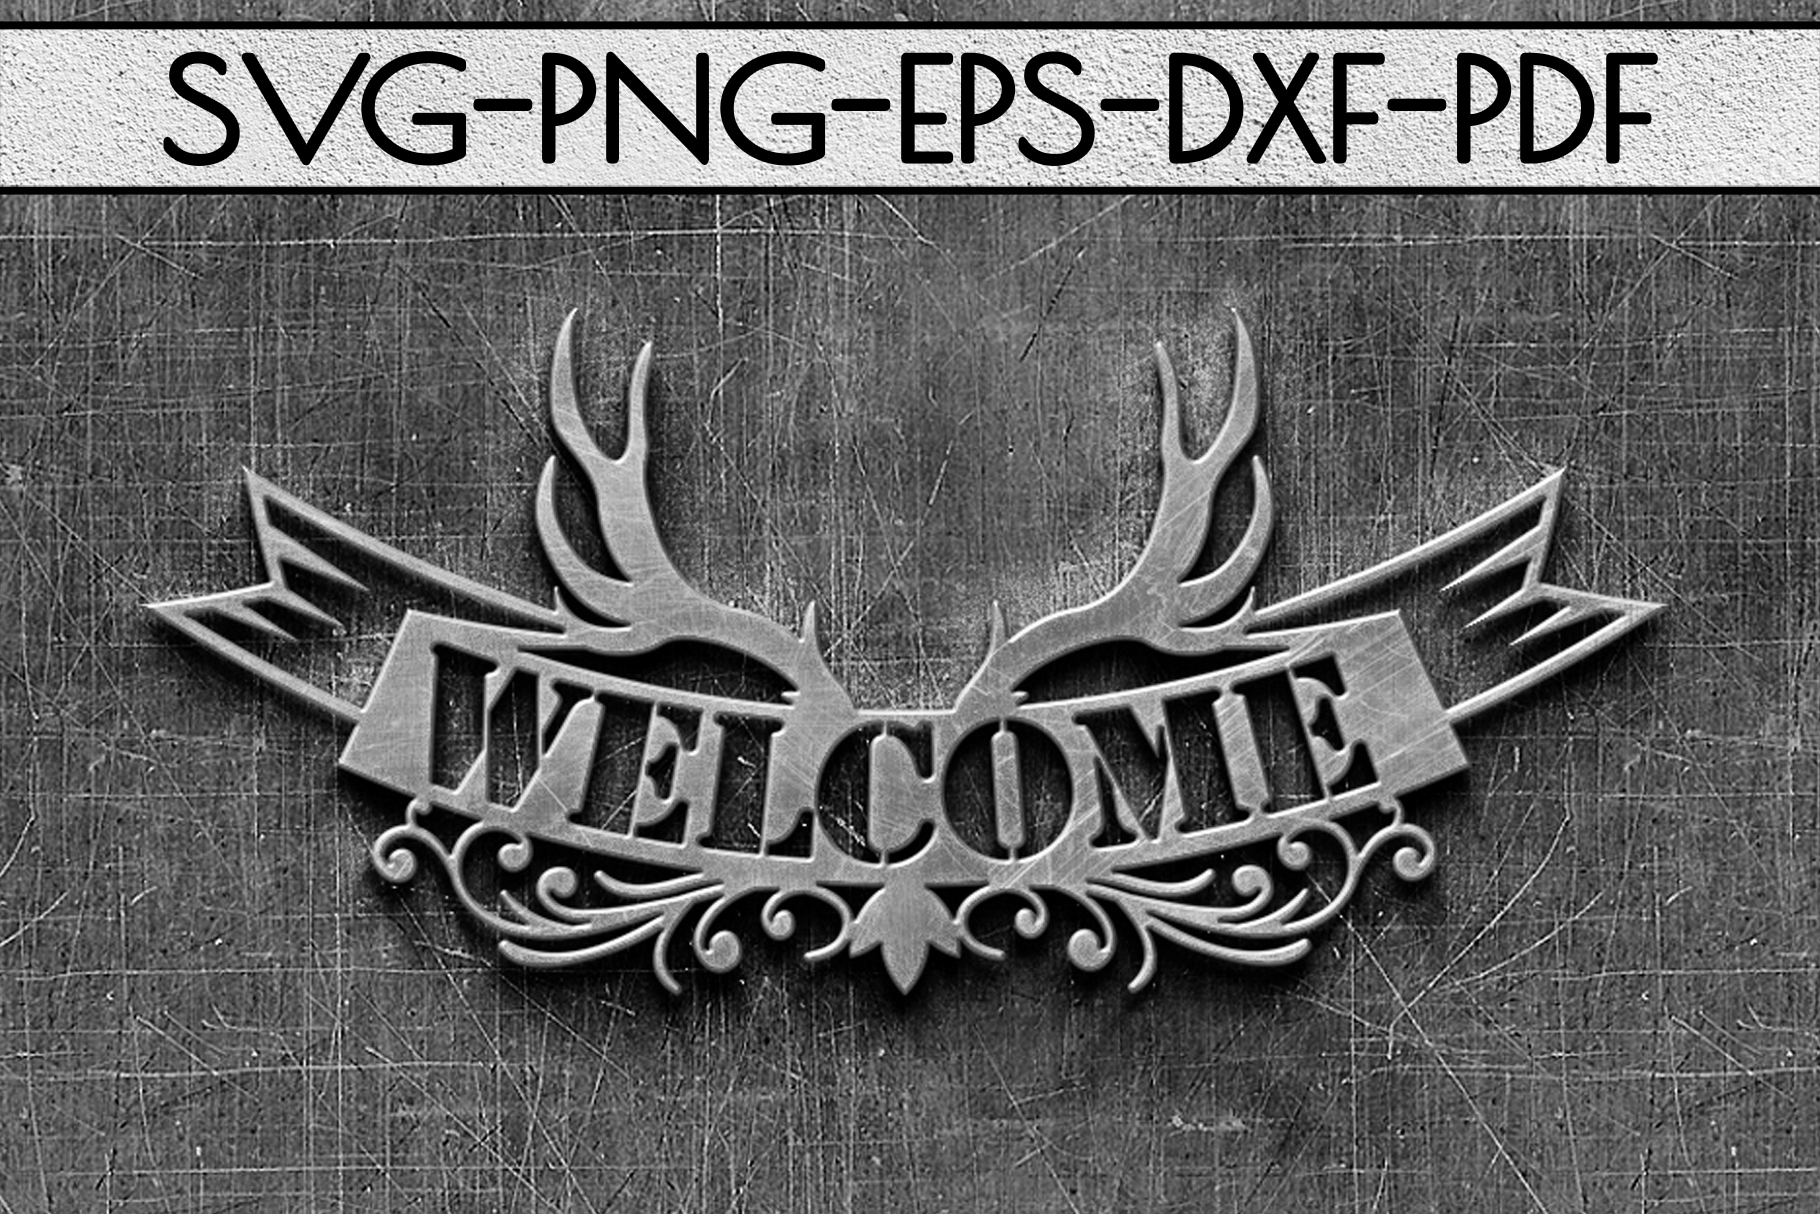 Welcome Antler Sign Papercut Template, Home Decor SVG, PDF ...